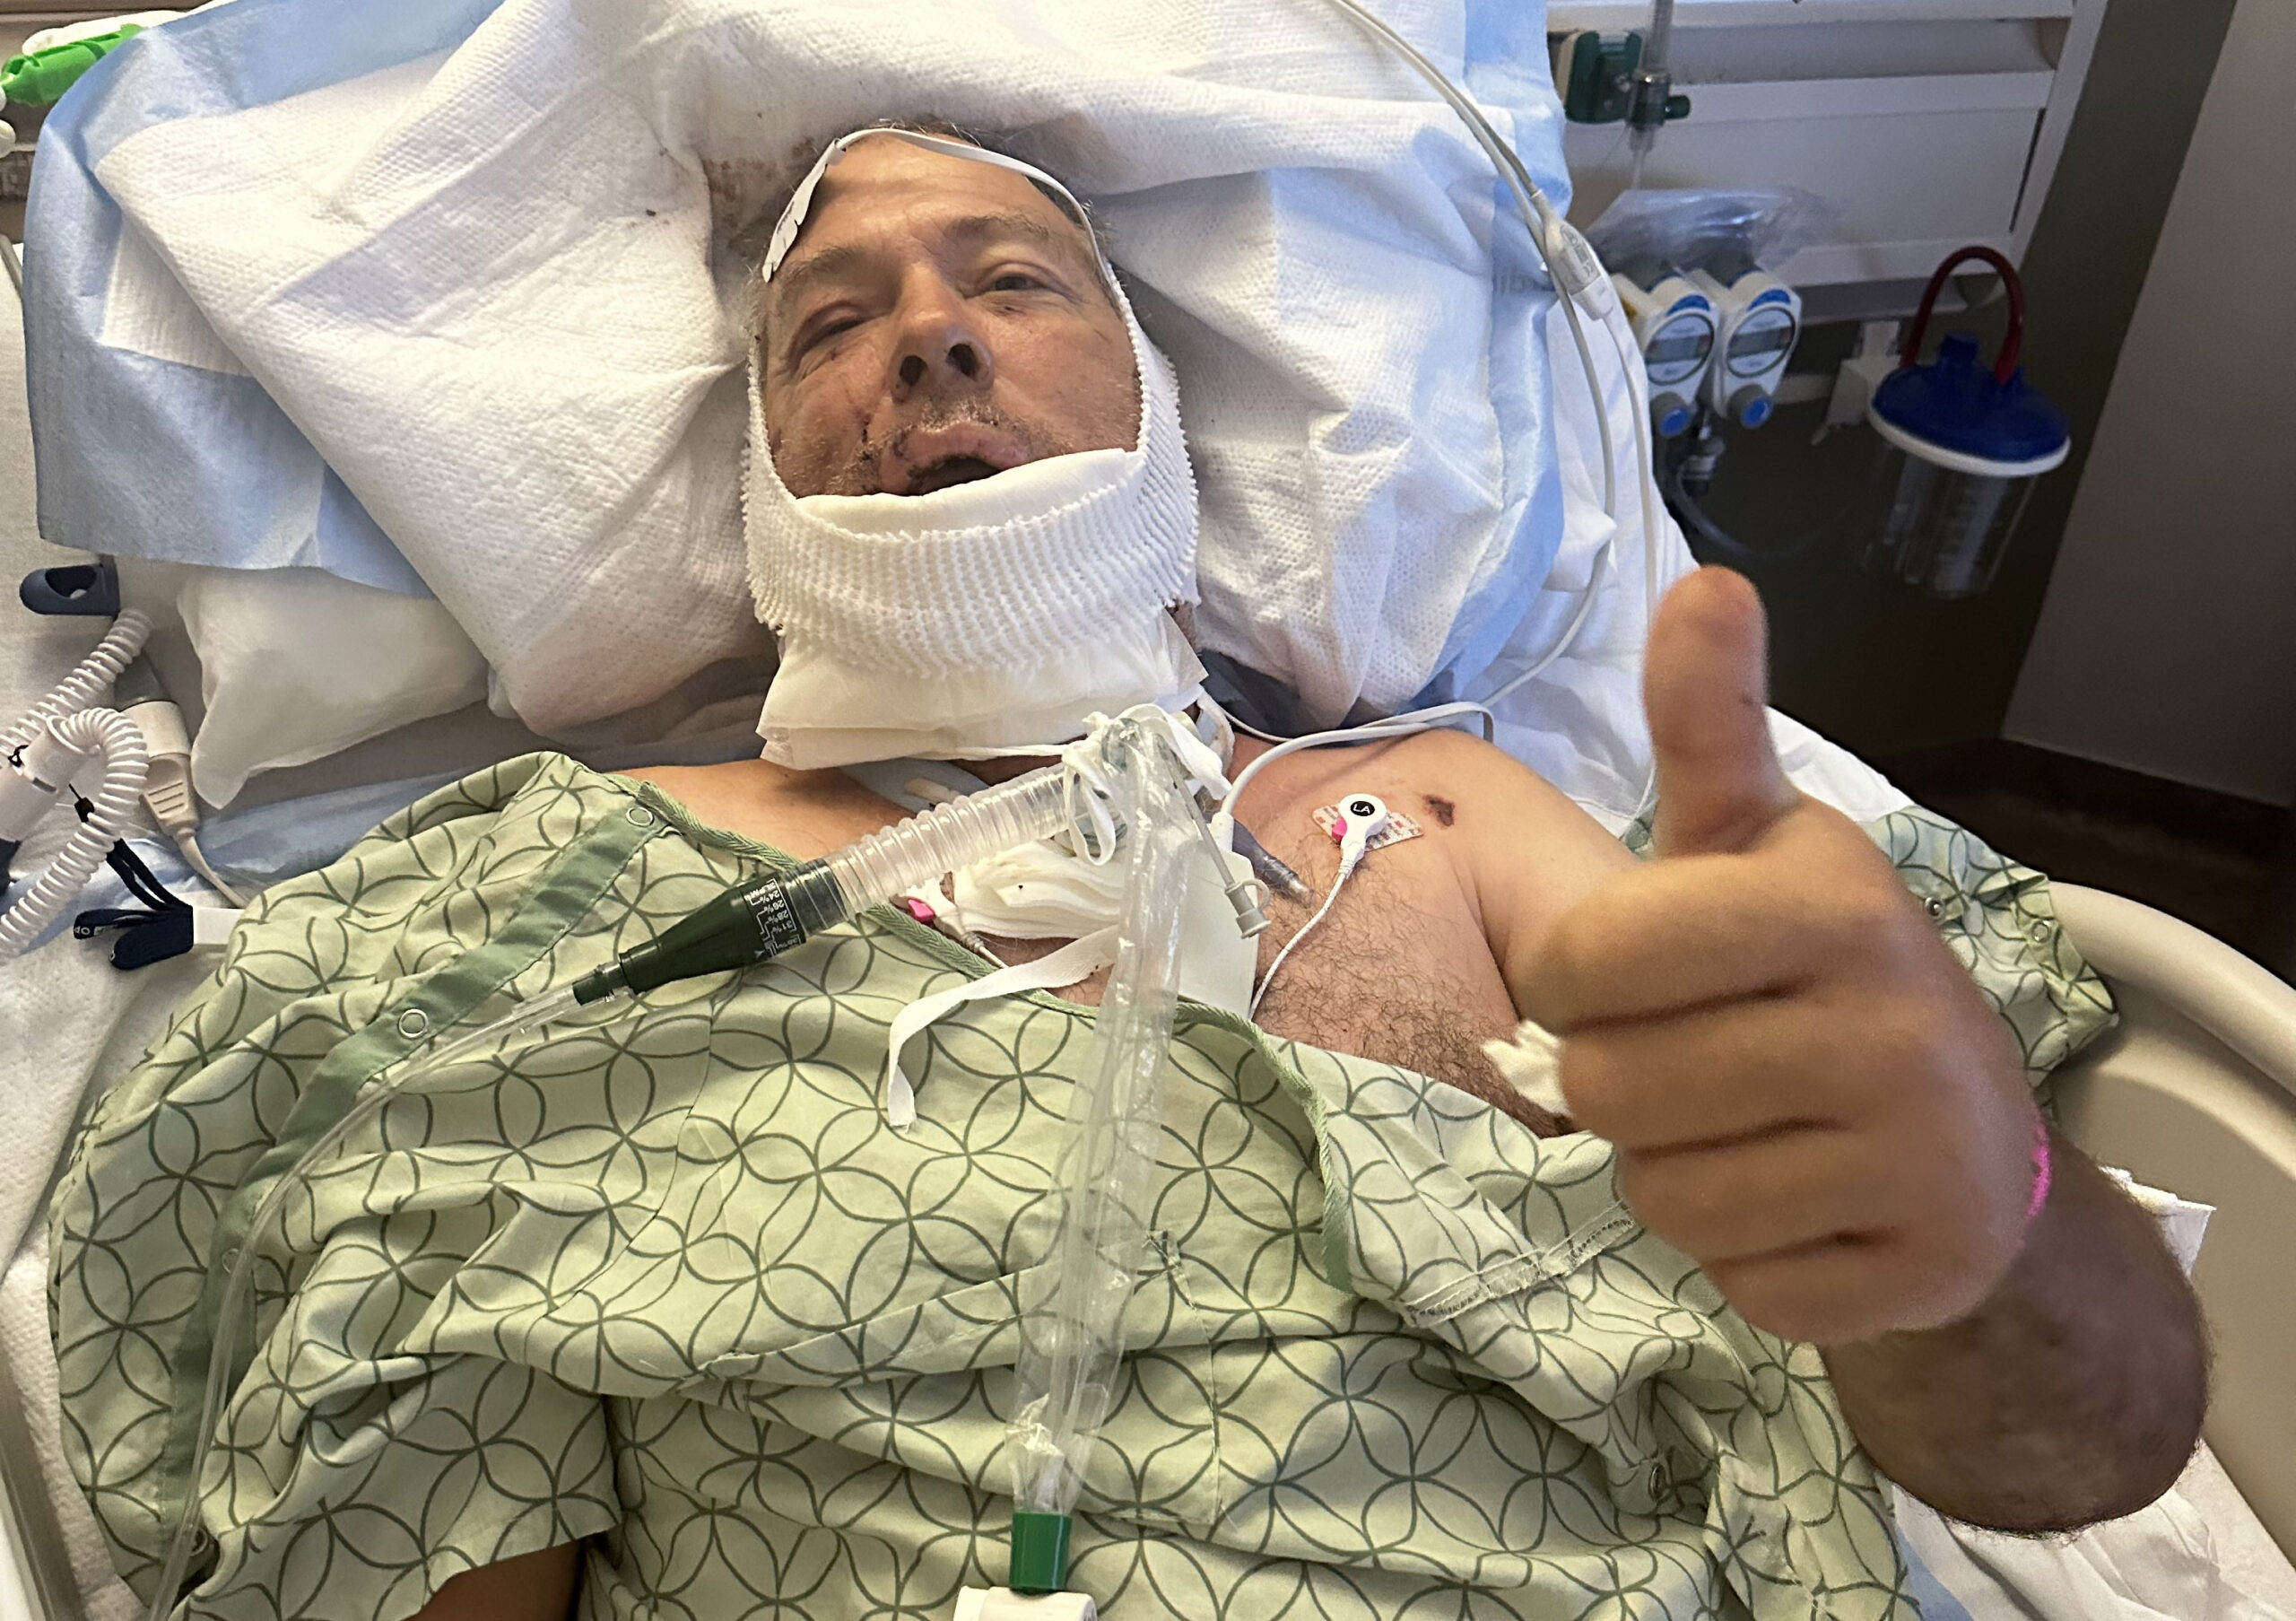 Montana Man Attacked by Grizzly Bear While Helping Track a Deer